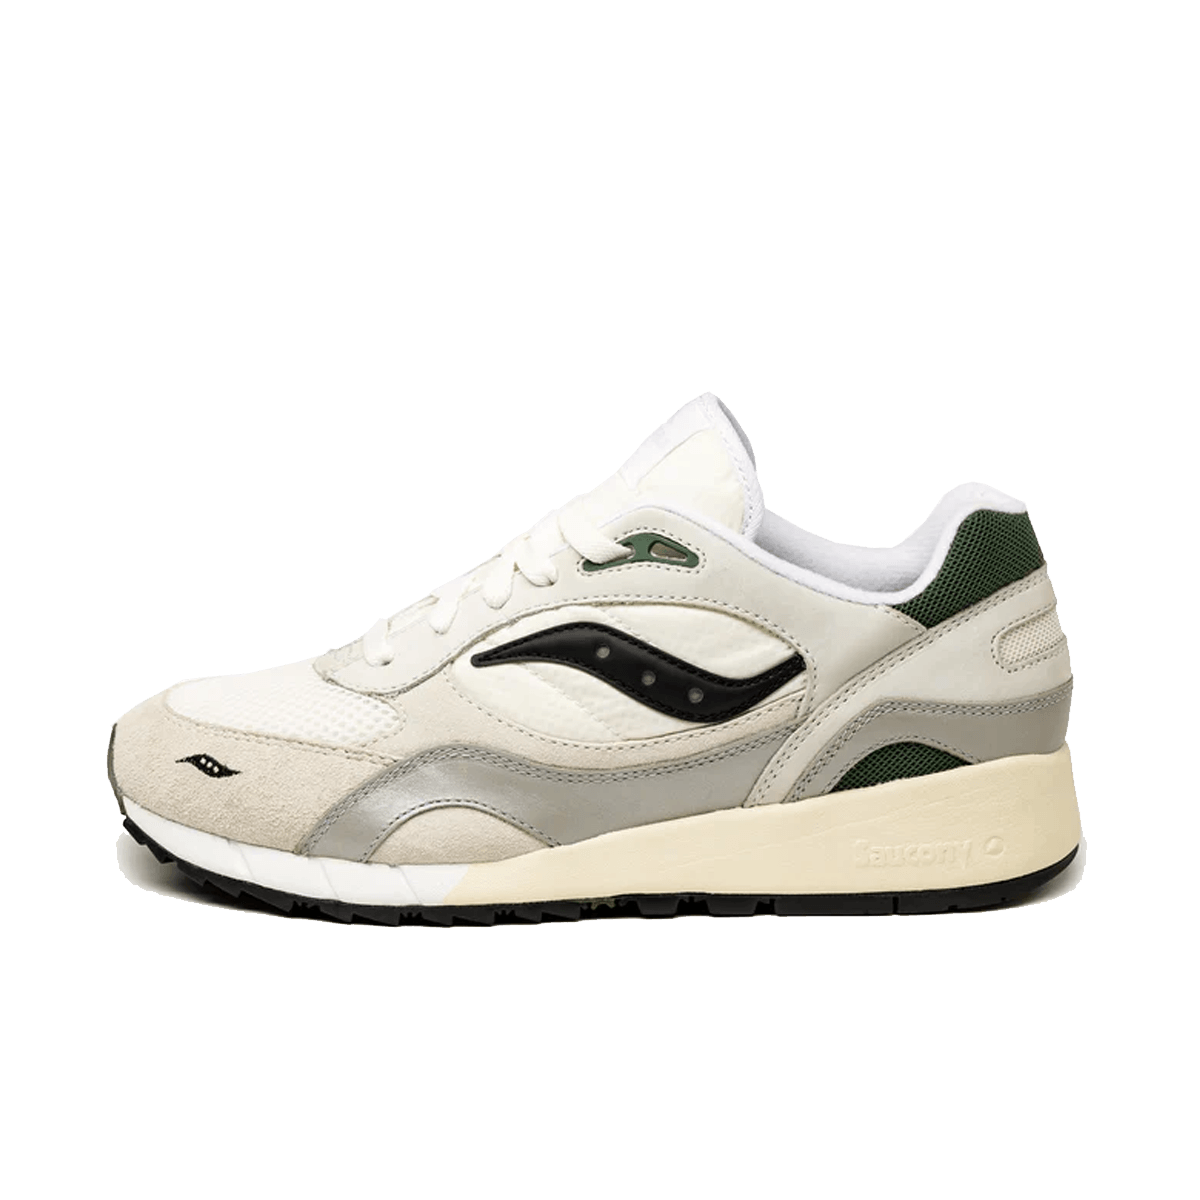 Asphaltgold x Saucony Shadow 6000 'White' S70823-1